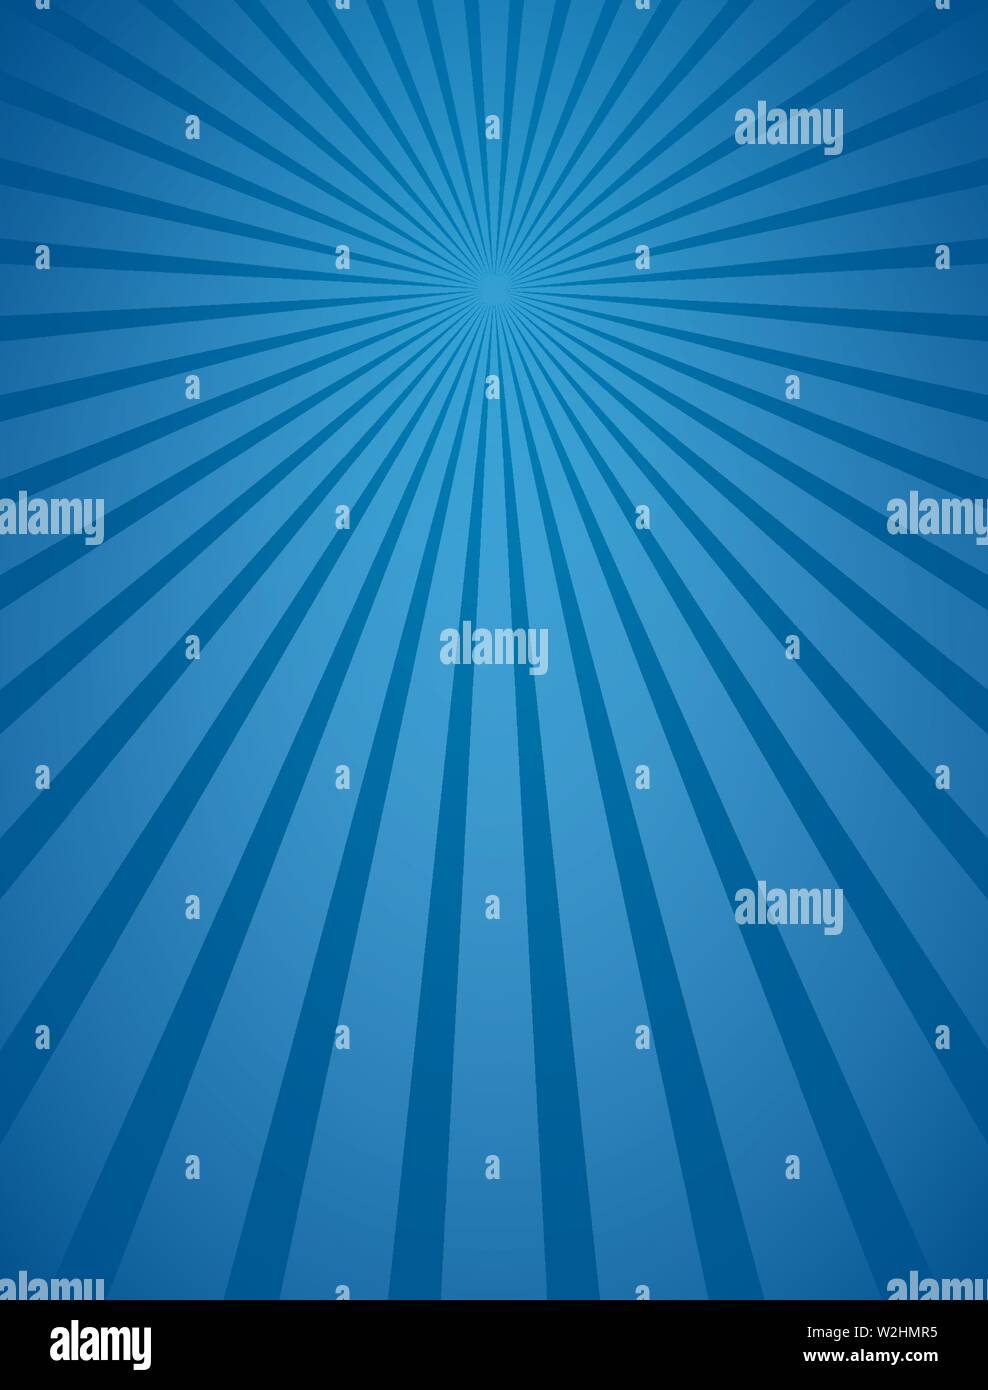 Blue beams and rays abstract vector illustration radial lines background Stock Vector